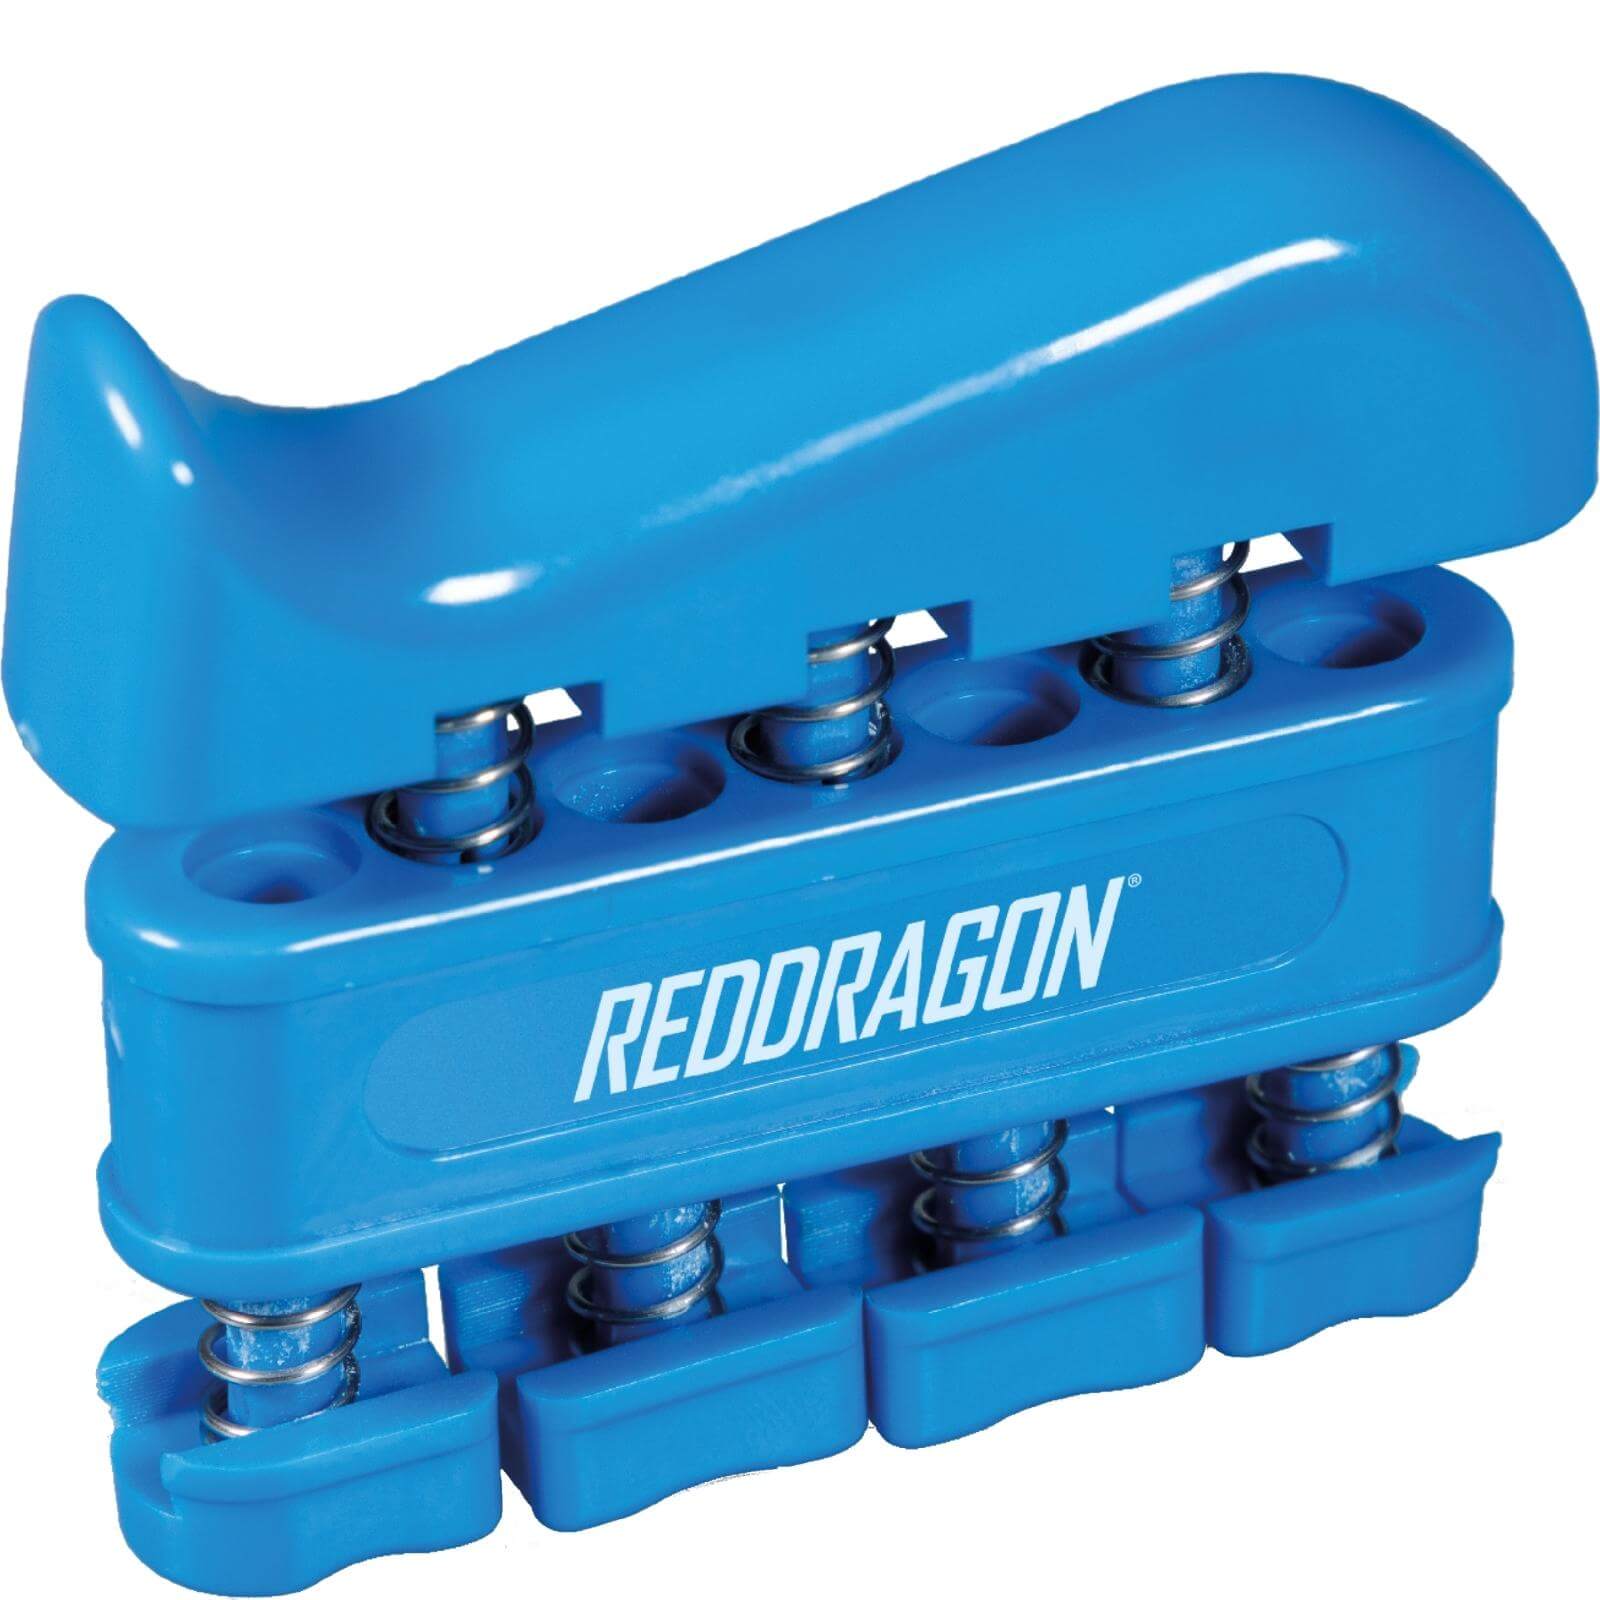 Other Accessories - Red Dragon - Gerwyn Price Iceman Pro Hand Exerciser 